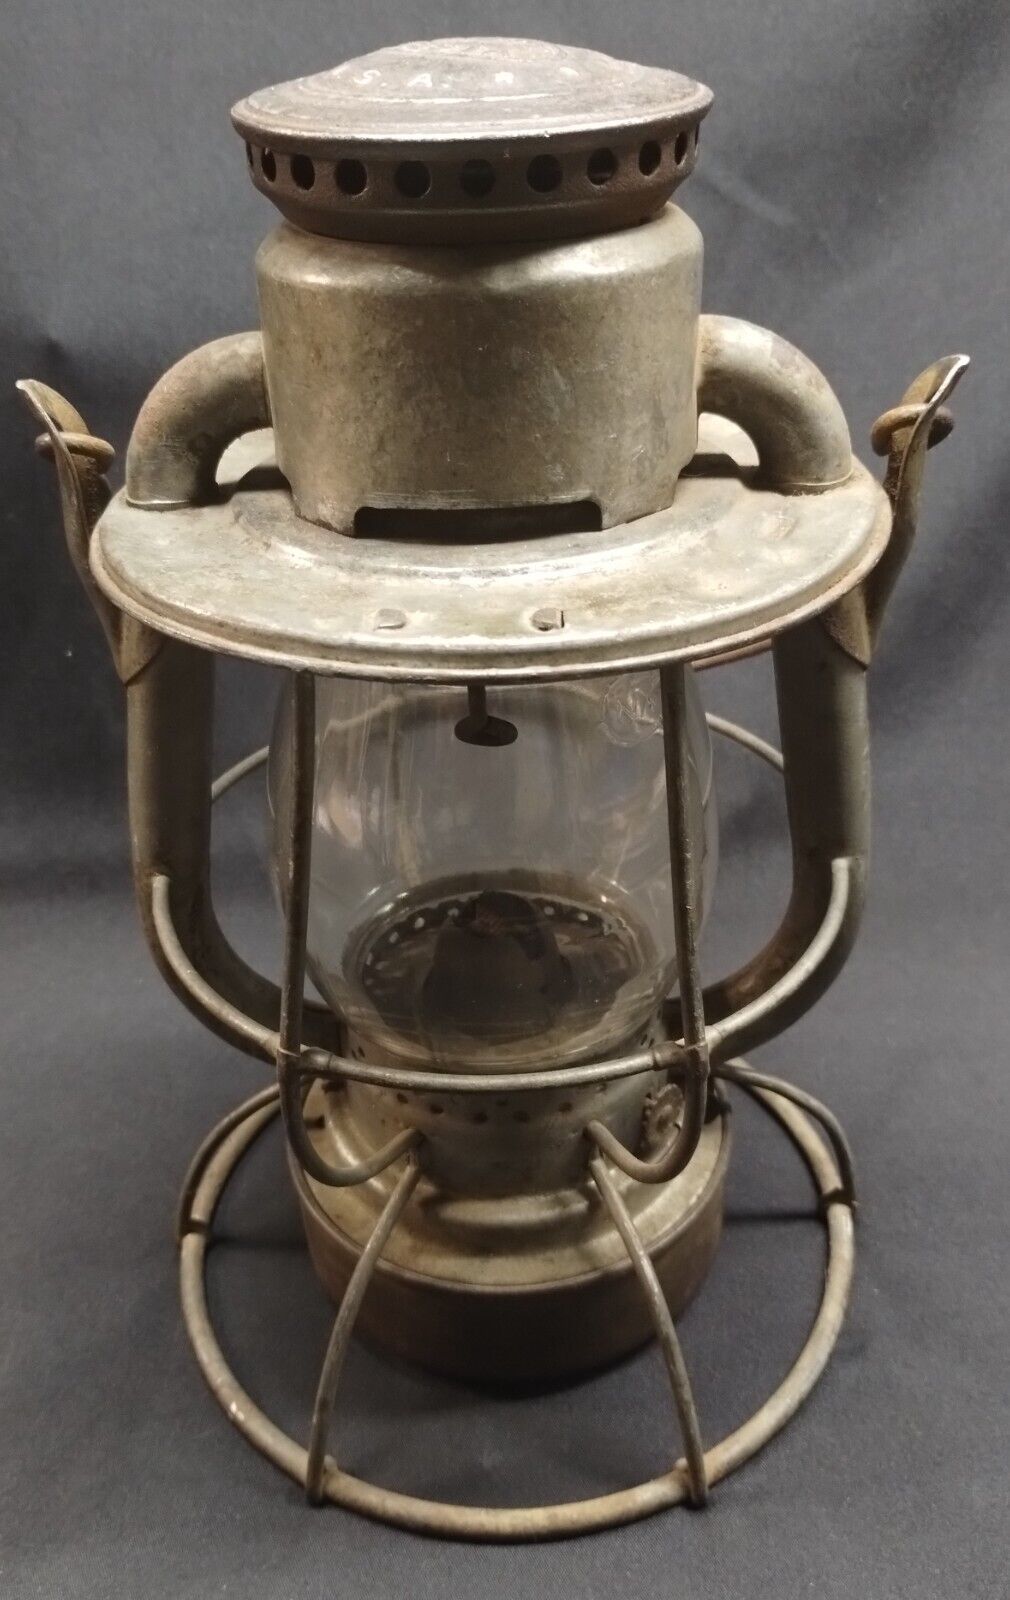 Good Looking Old DIETZ VESTA RR Lantern with Clear Glass Shade